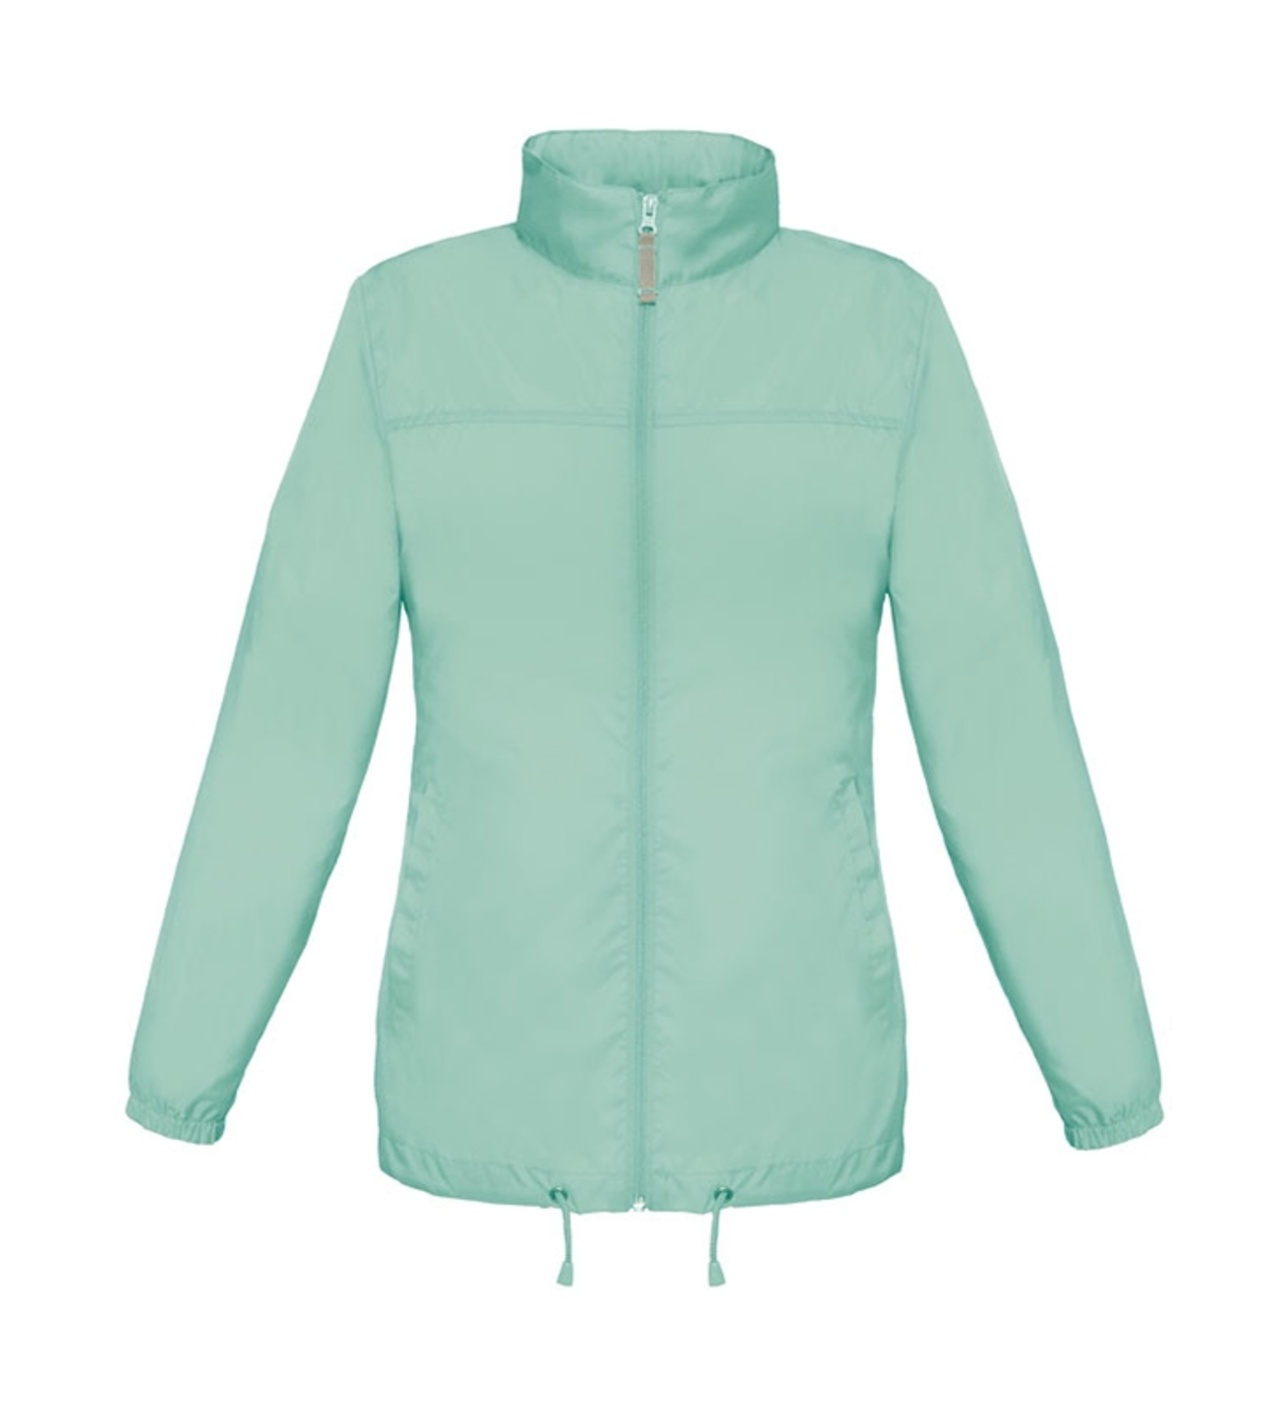 B and C Collection Sirocco Woman - PIXEL TURQUOISE - L